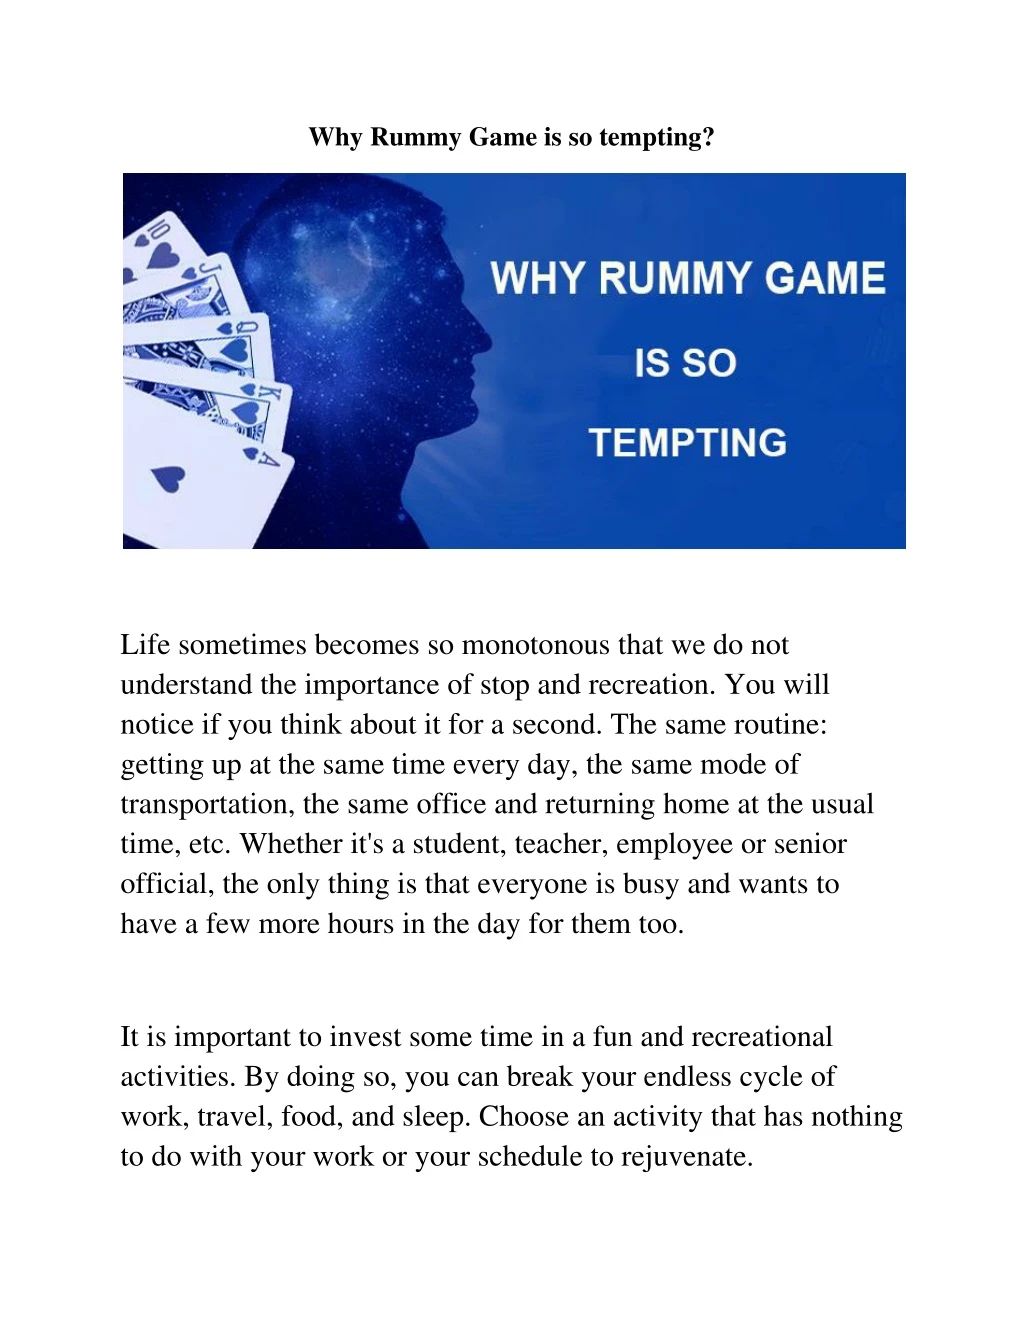 why rummy game is so tempting